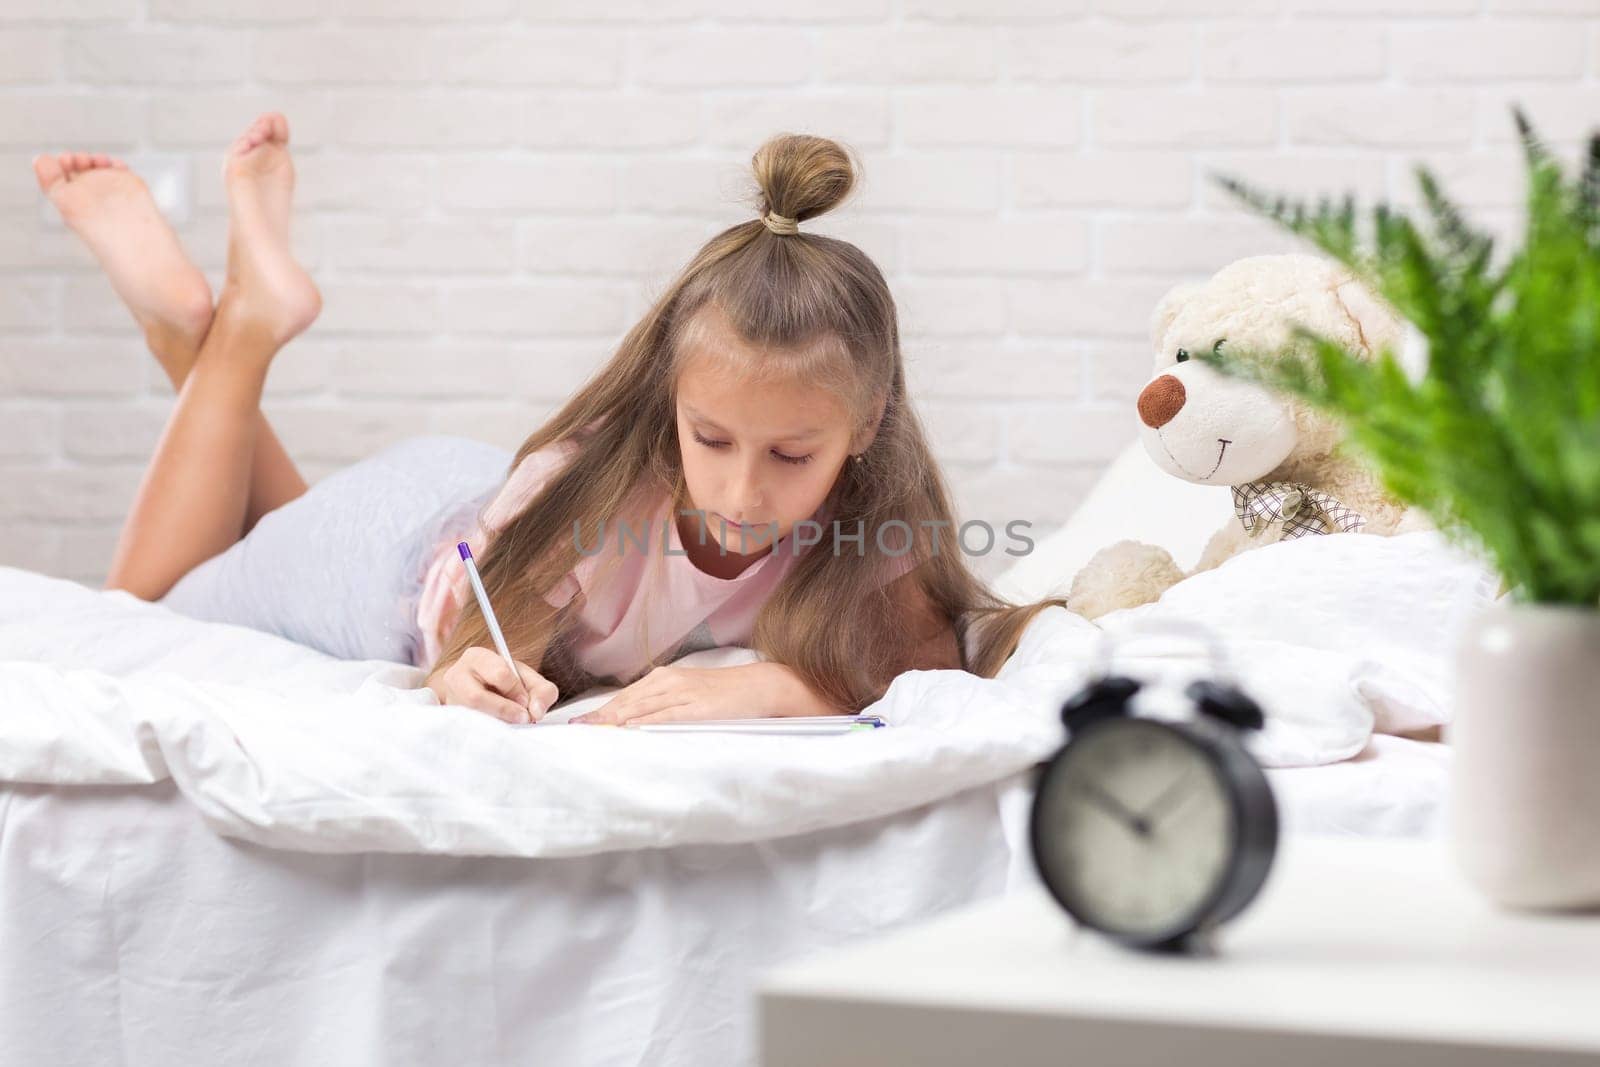 cute little girl drawing pictures while lying on bed. Kid painting at home